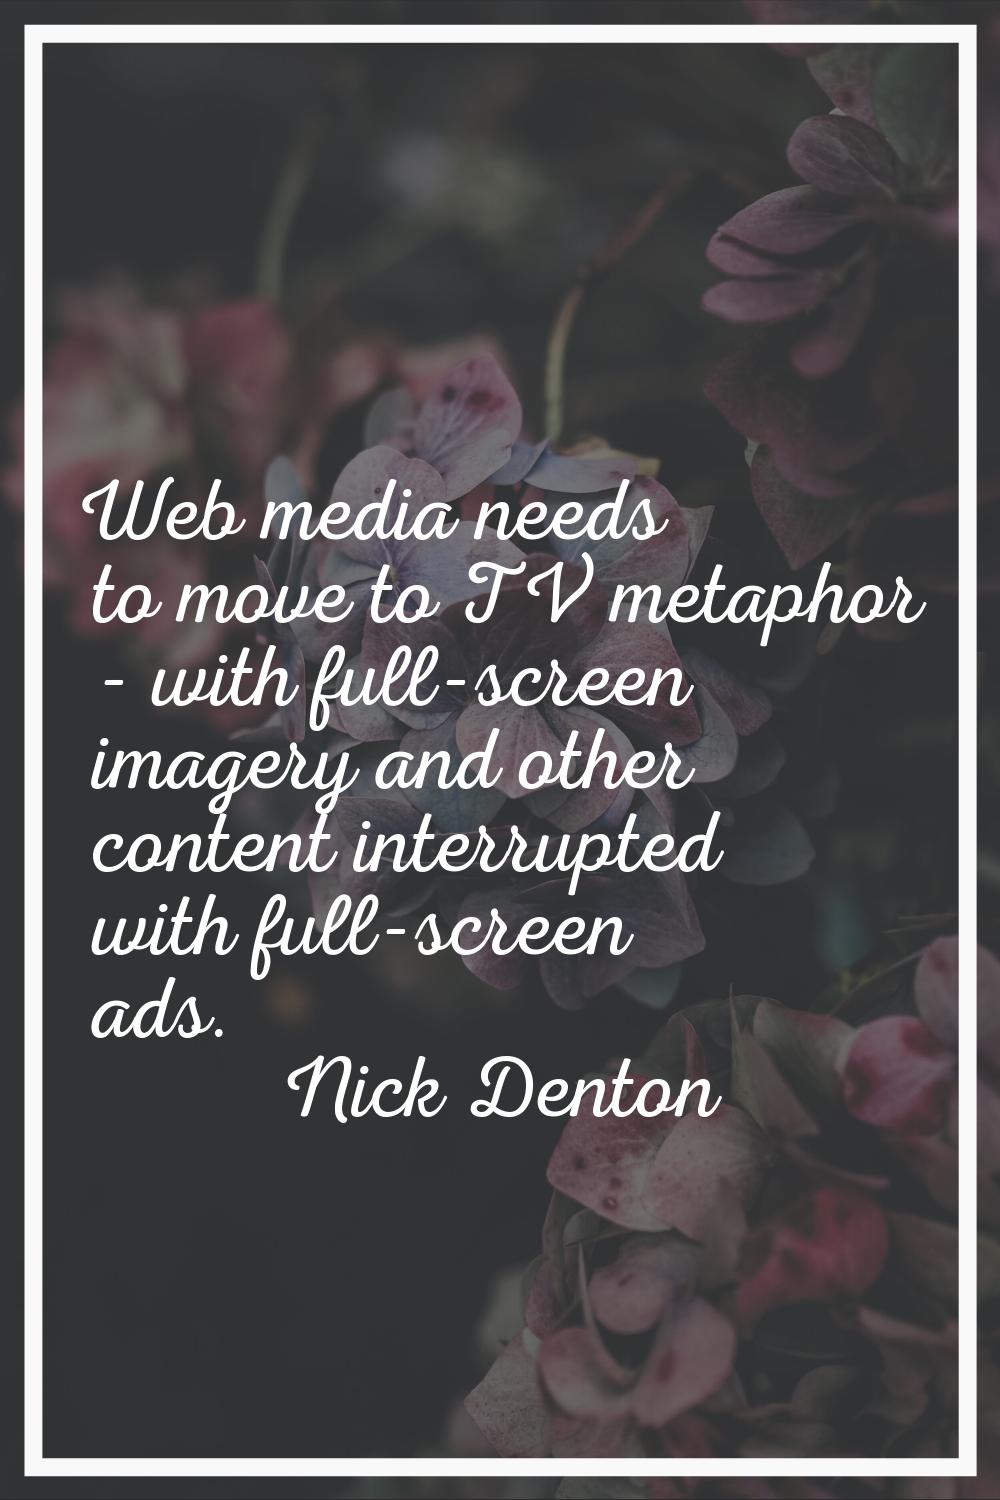 Web media needs to move to TV metaphor - with full-screen imagery and other content interrupted wit